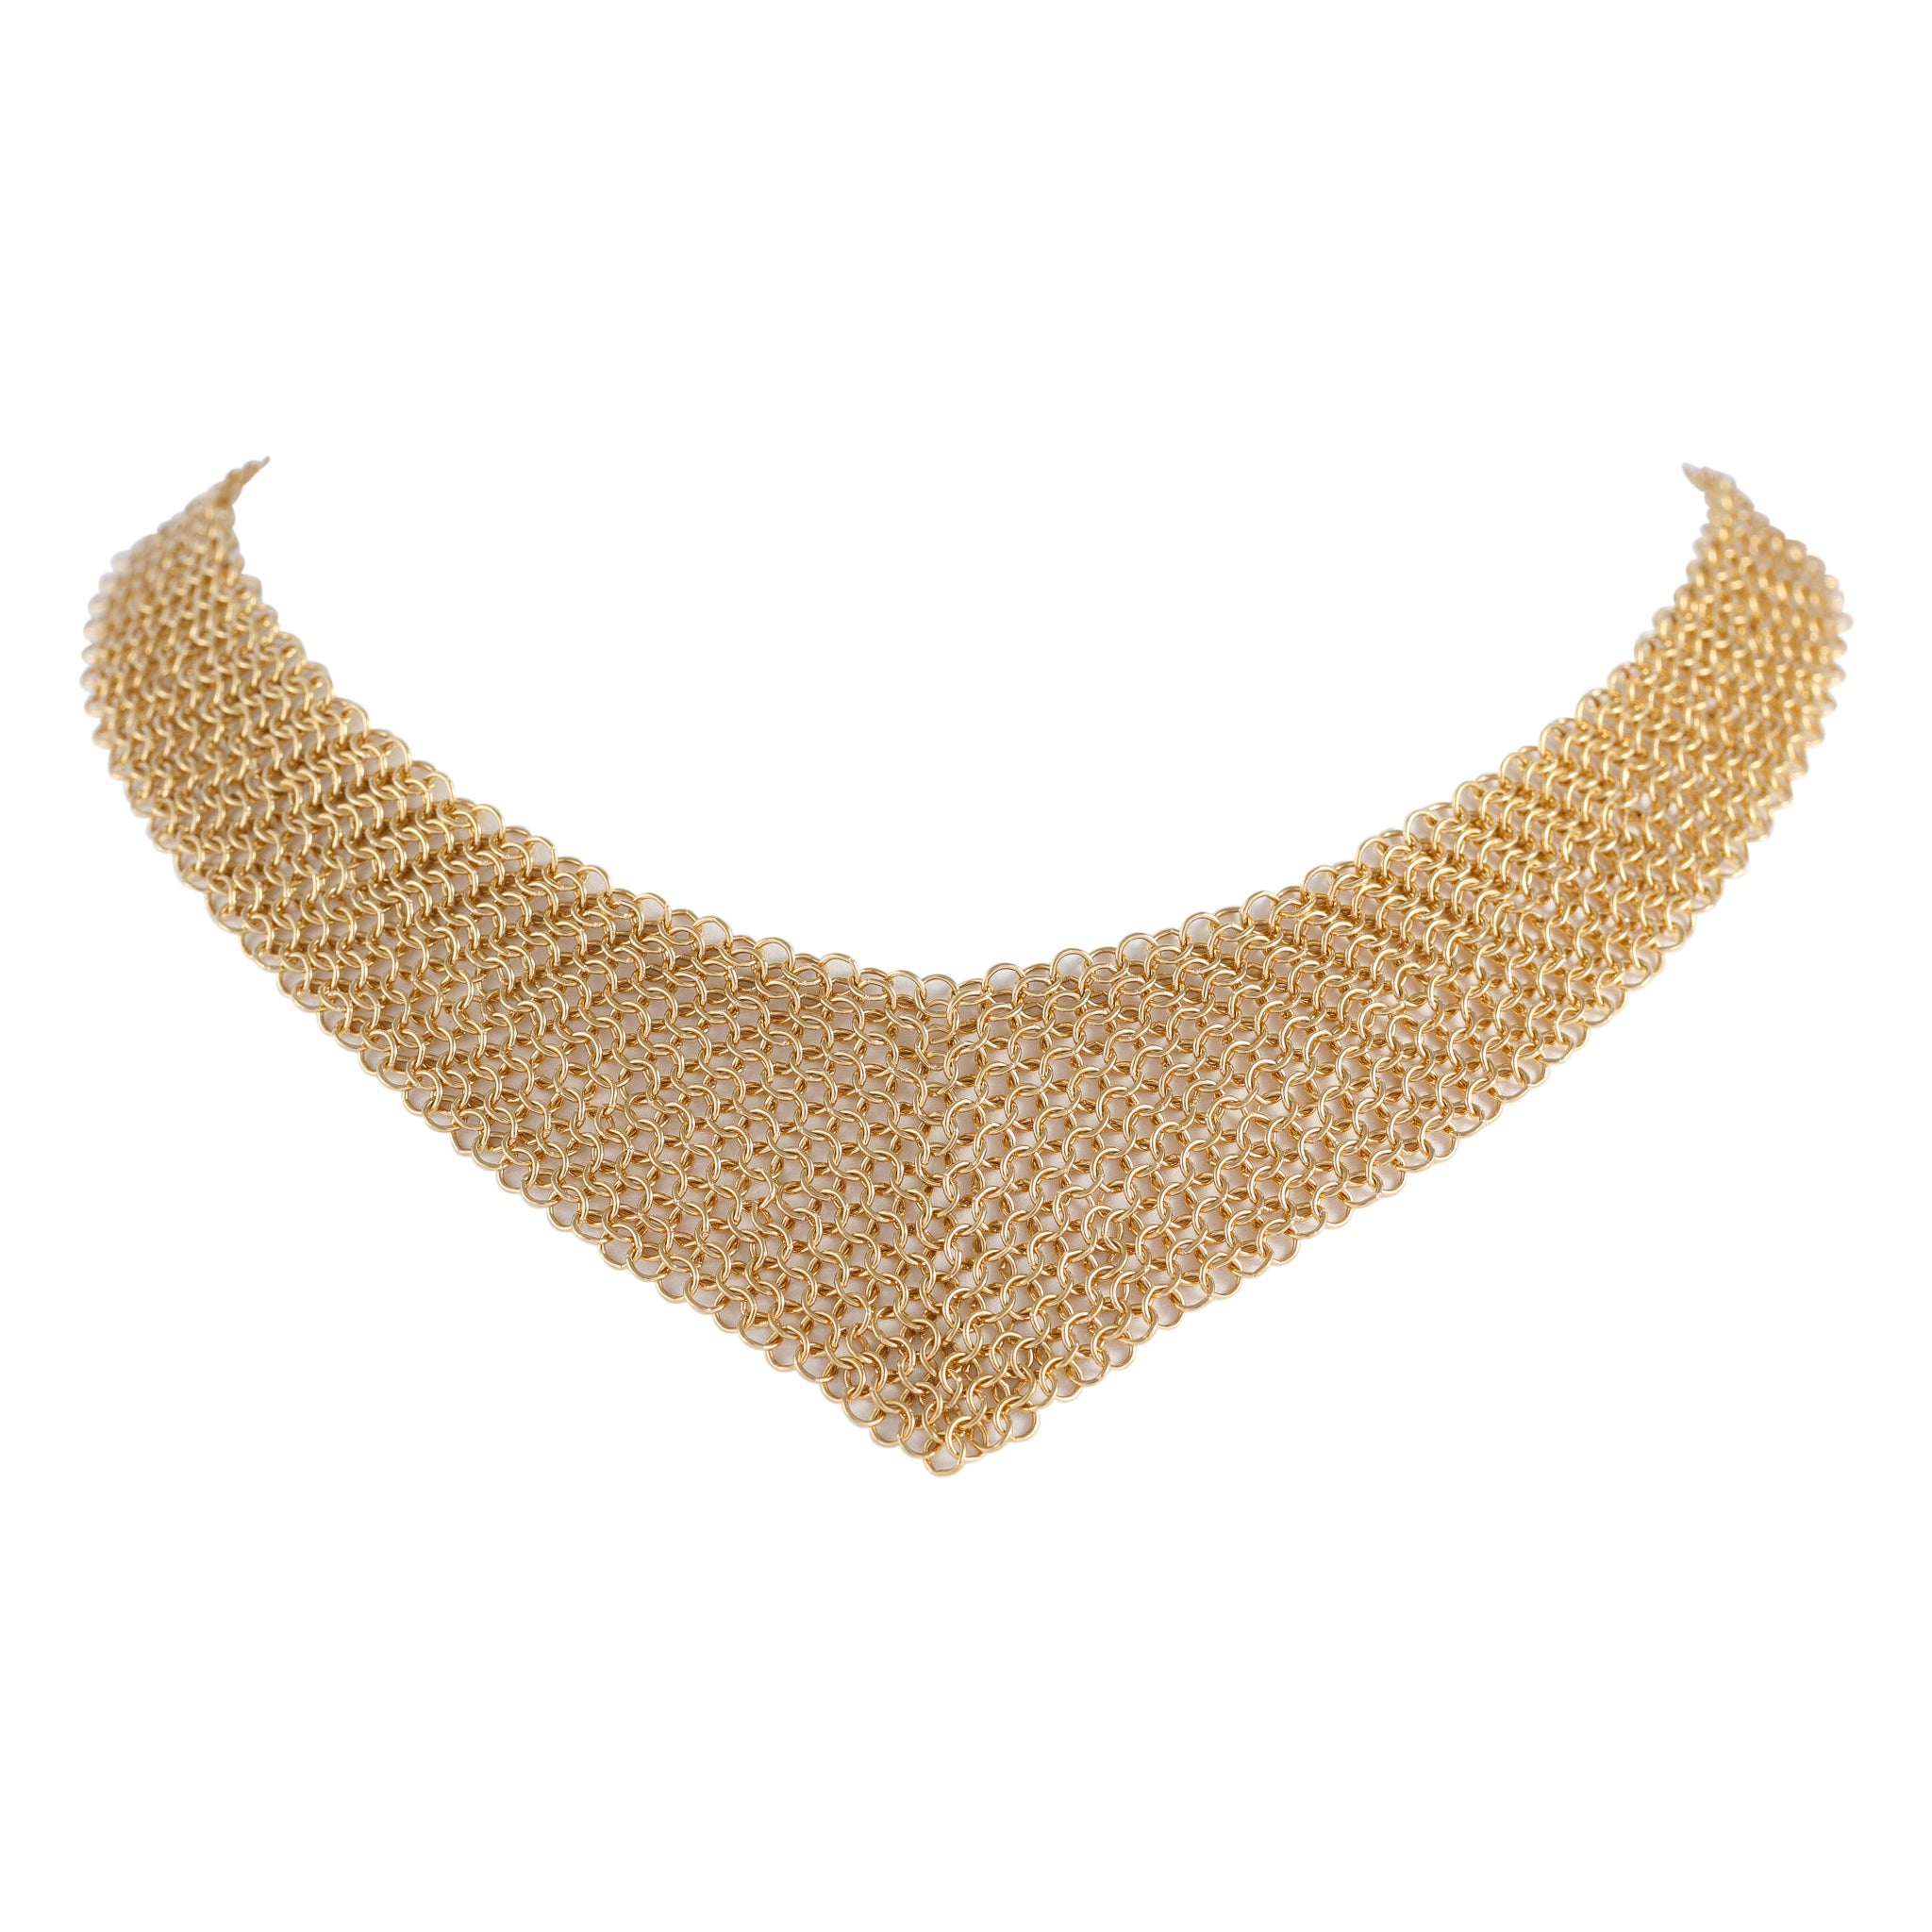 Elsa Peretti for Tiffany and Co Mesh Scarf Necklace